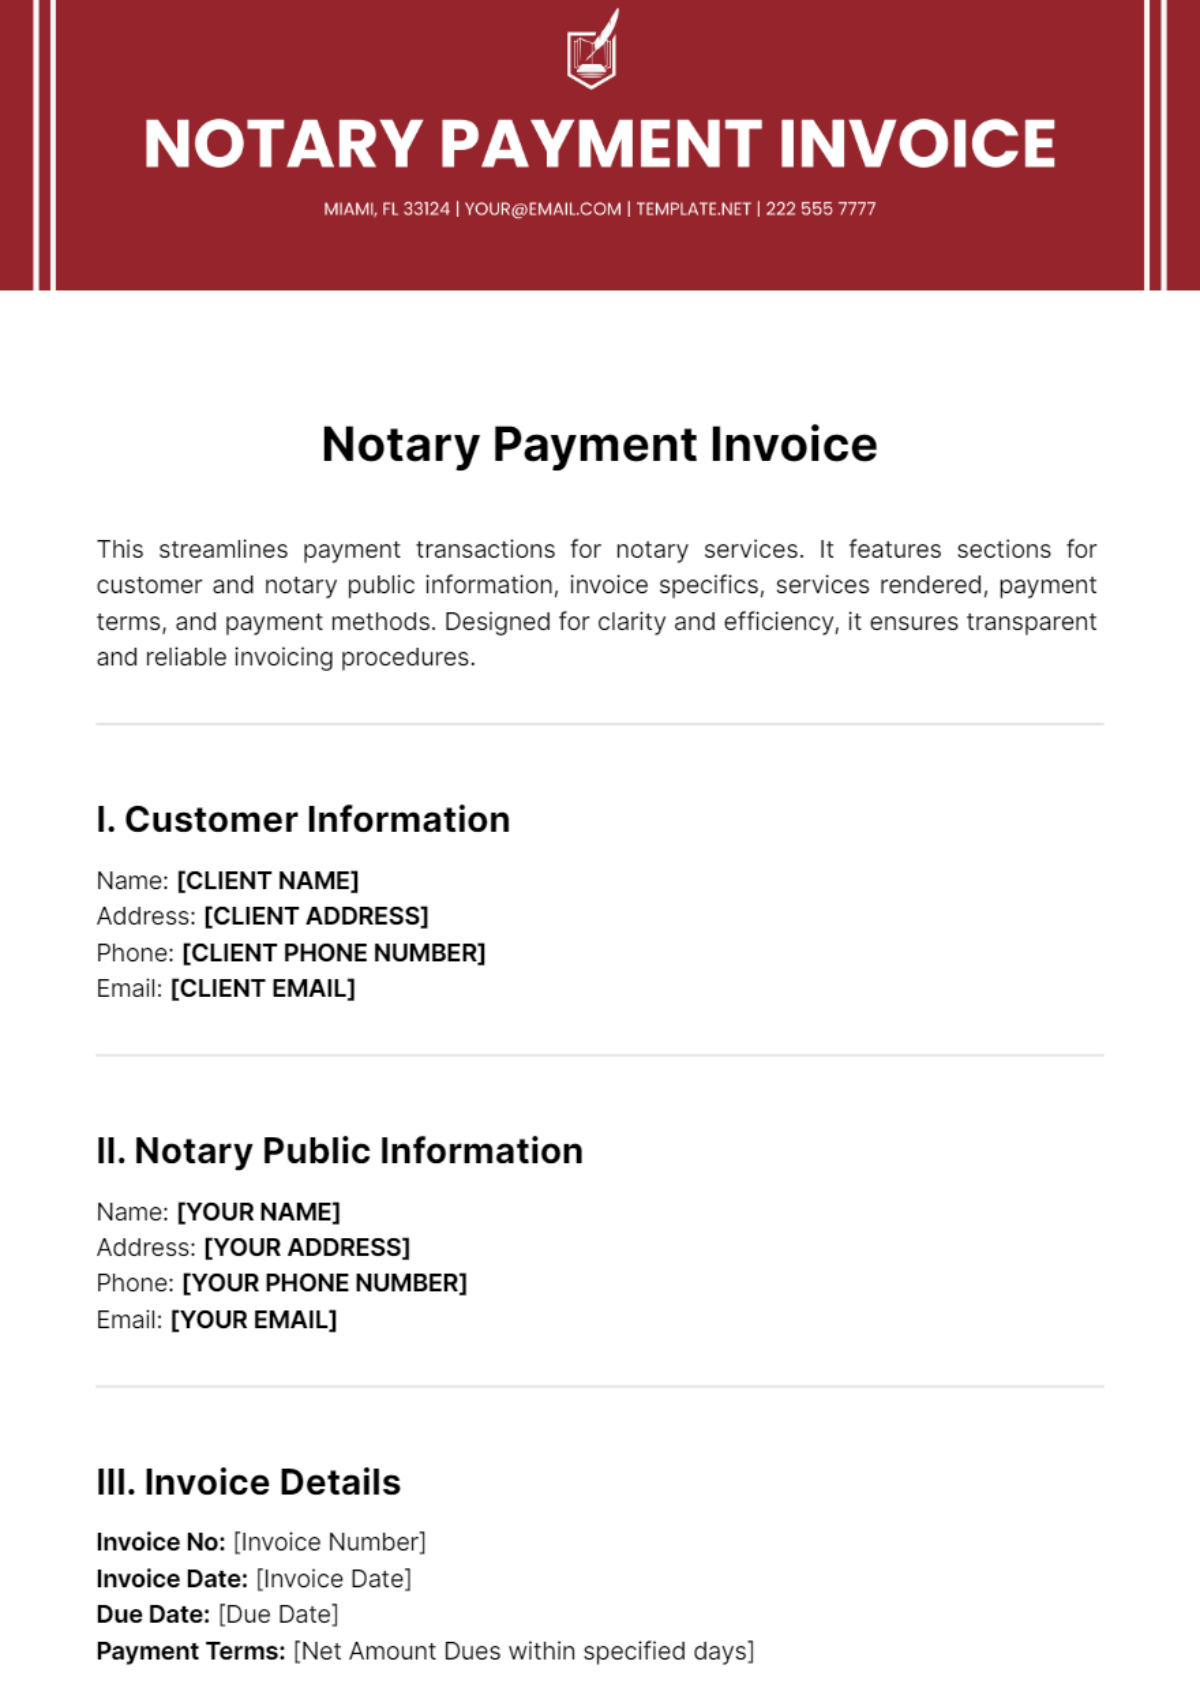 Free Notary Payment Invoice Template